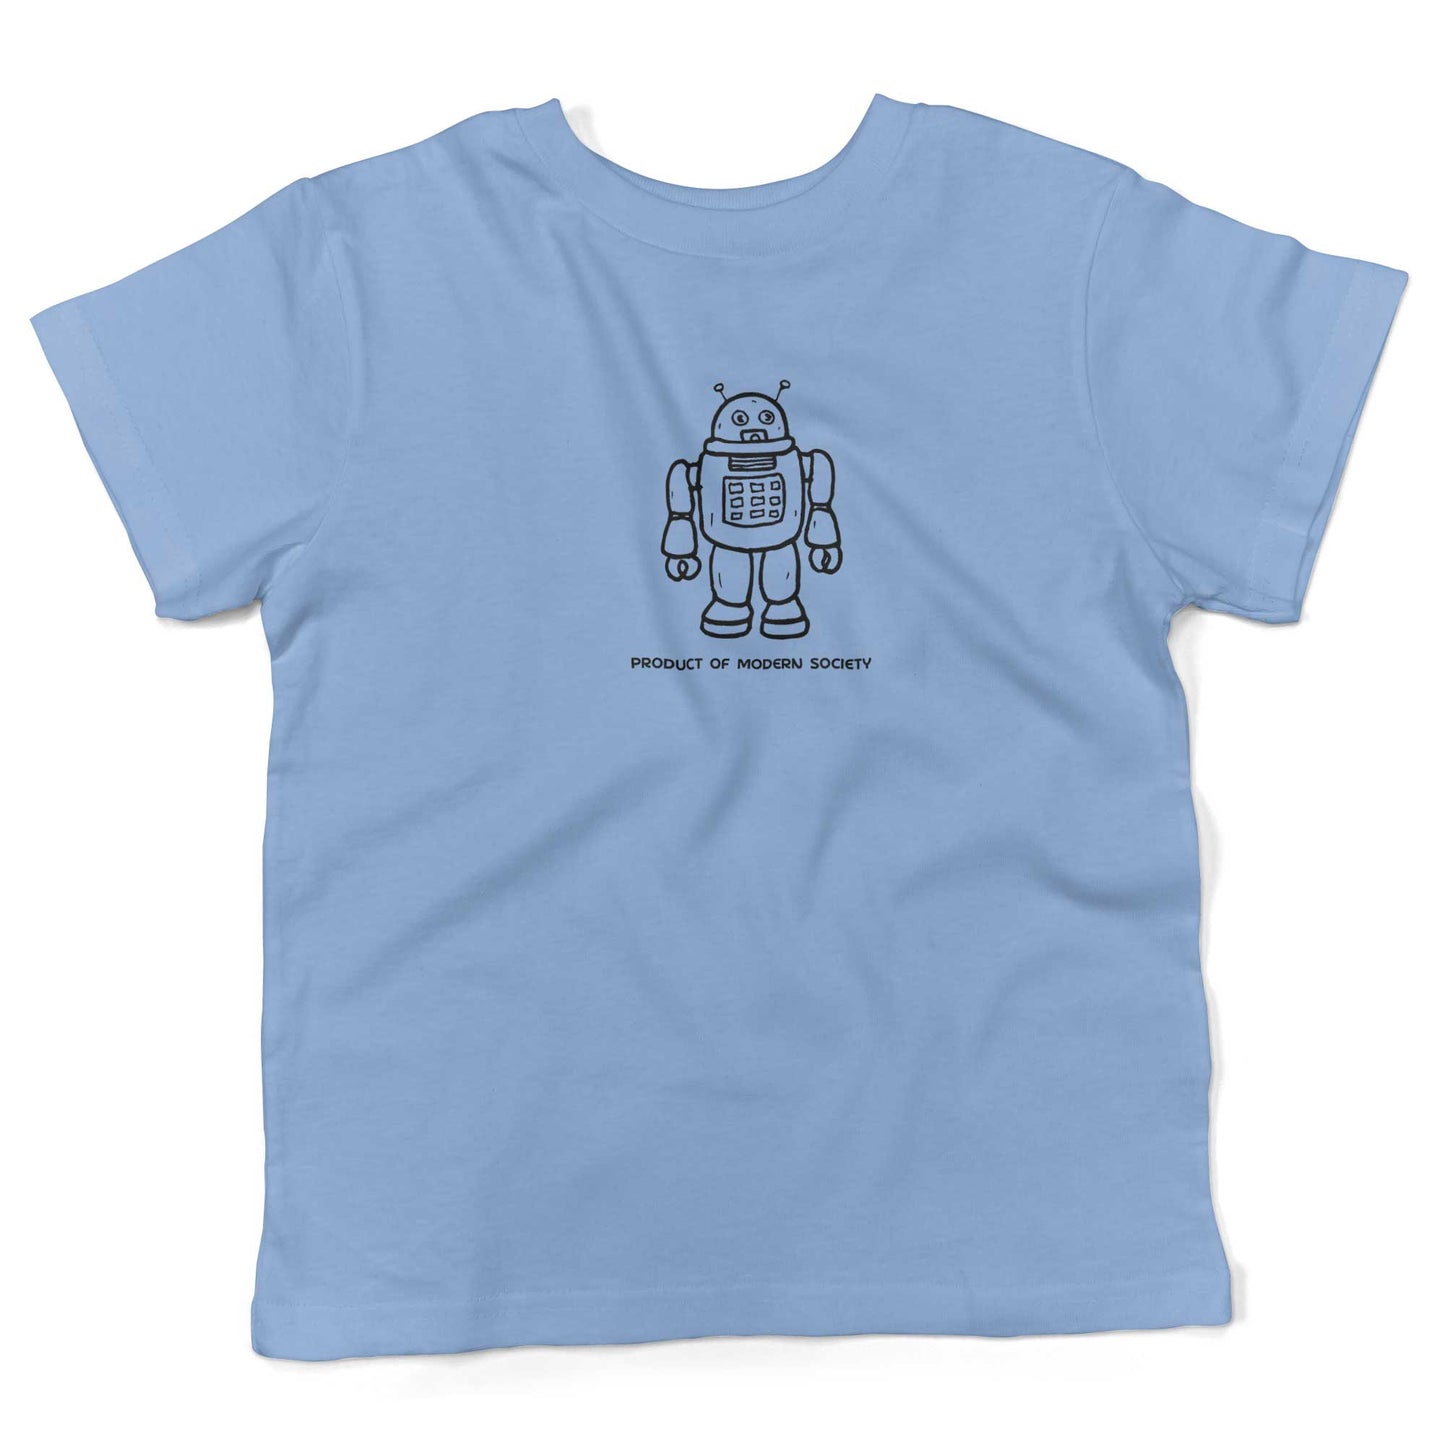 Product Of Modern Society Toddler Shirt-Organic Baby Blue-2T